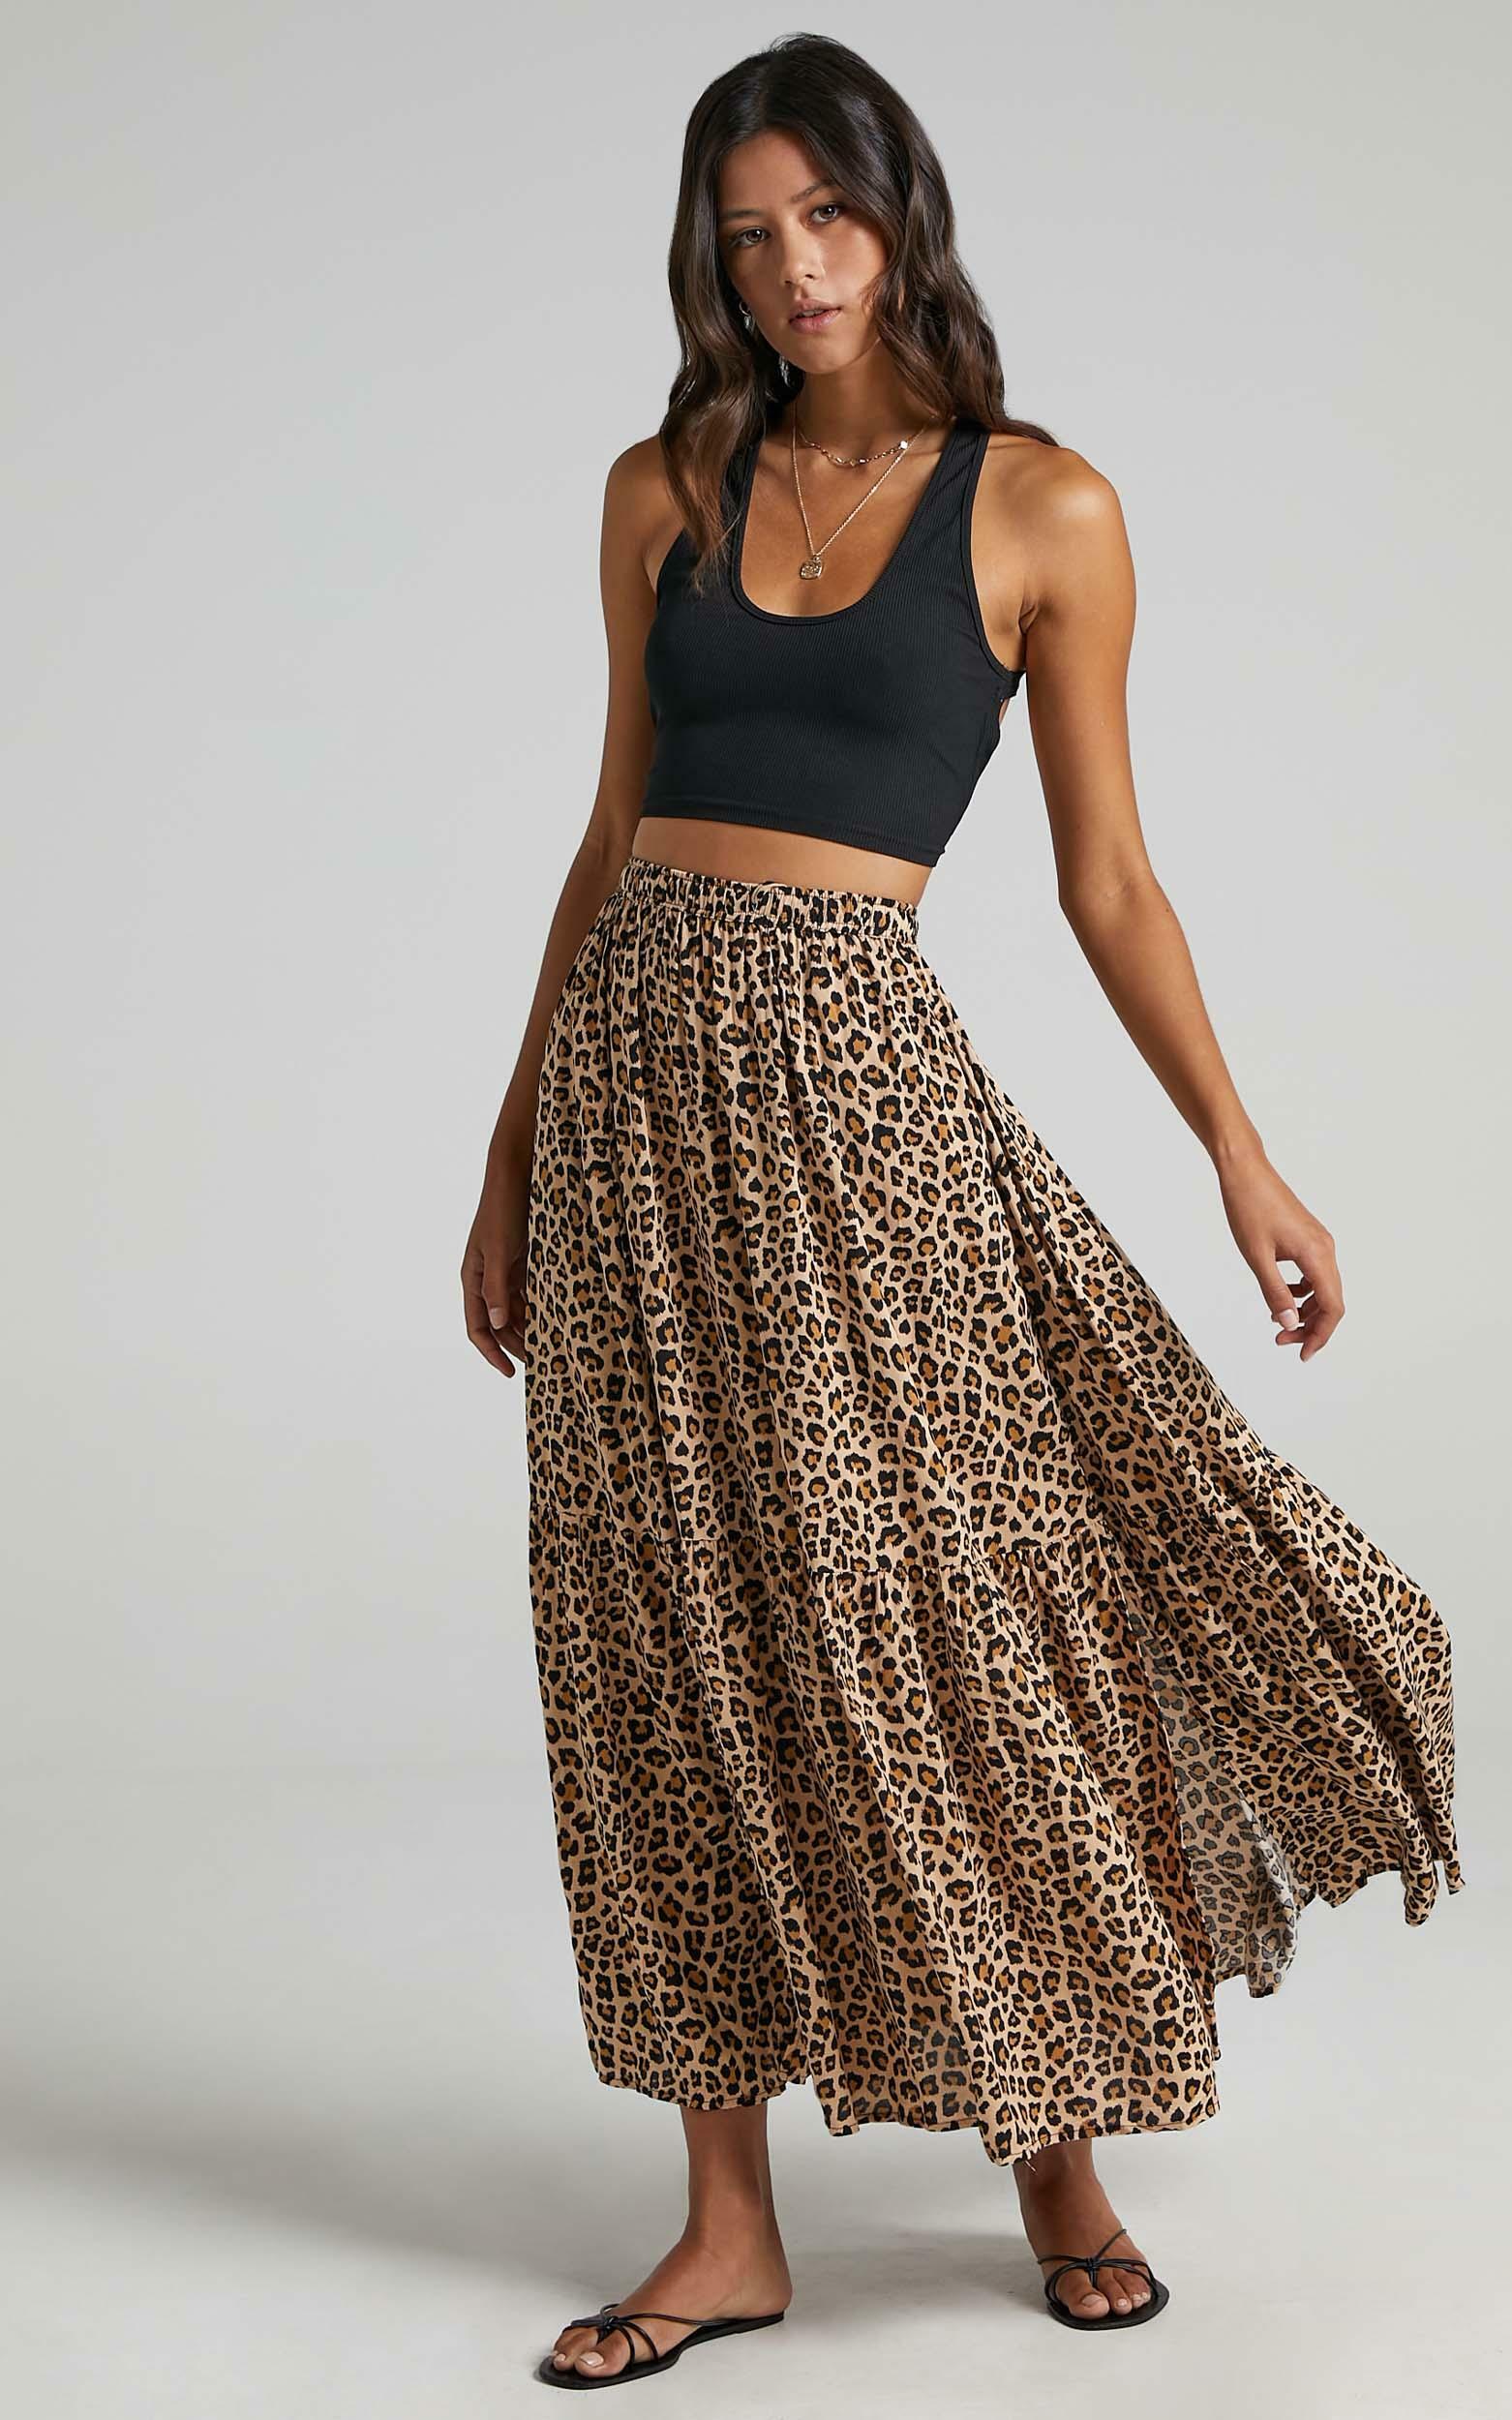 Off To Bali Skirt in Leopard Print - 06, BRN1, hi-res image number null